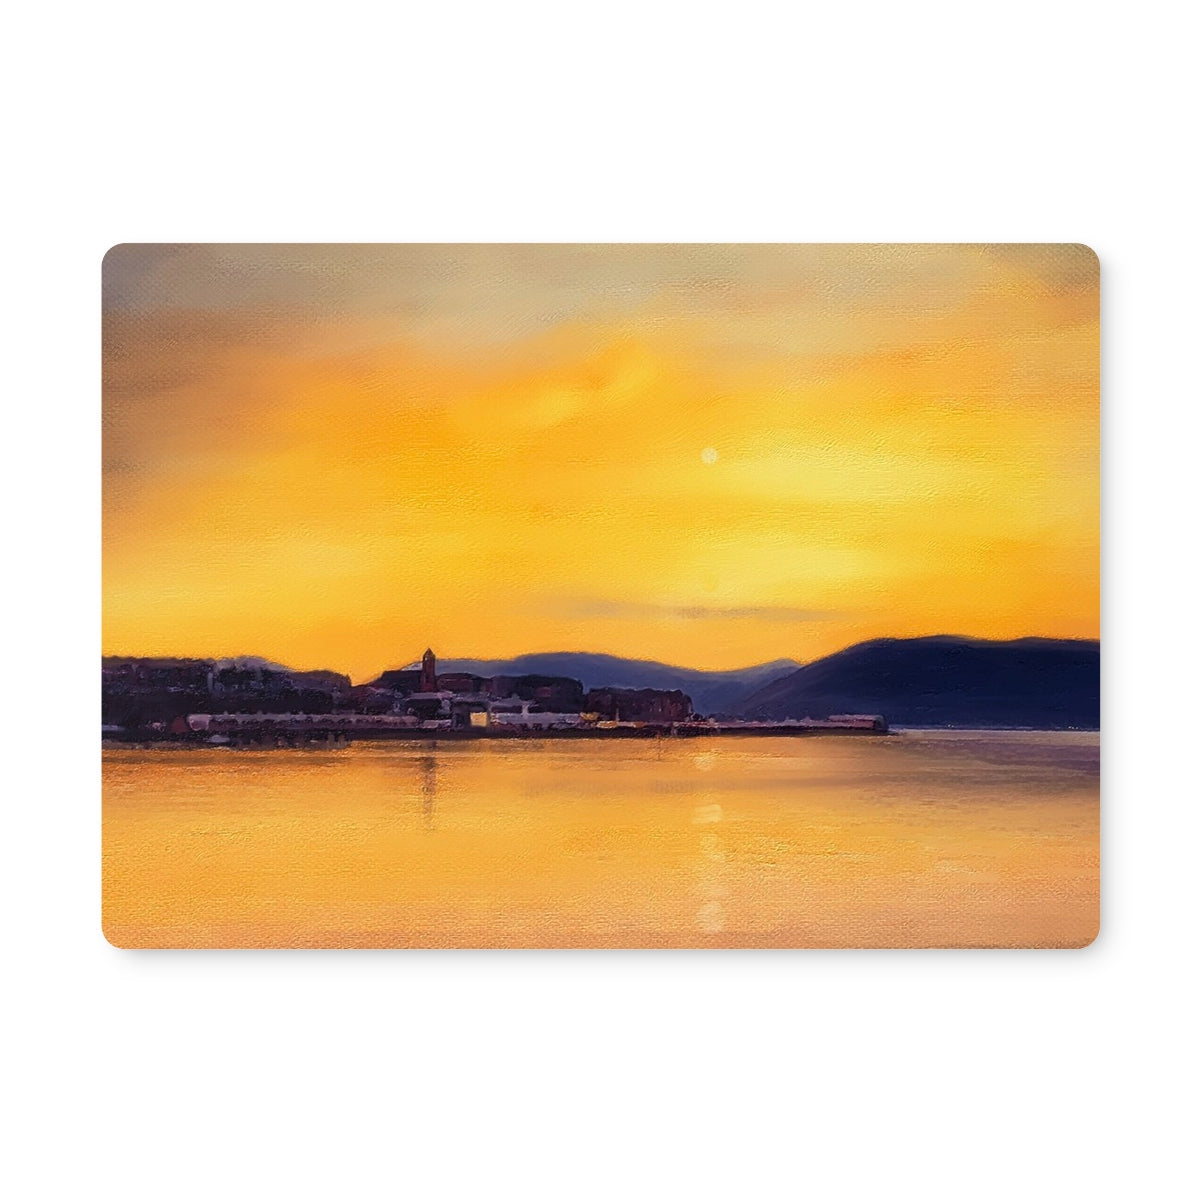 Gourock From Cardwell Bay Art Gifts Placemat-Placemats-River Clyde Art Gallery-Single Placemat-Paintings, Prints, Homeware, Art Gifts From Scotland By Scottish Artist Kevin Hunter